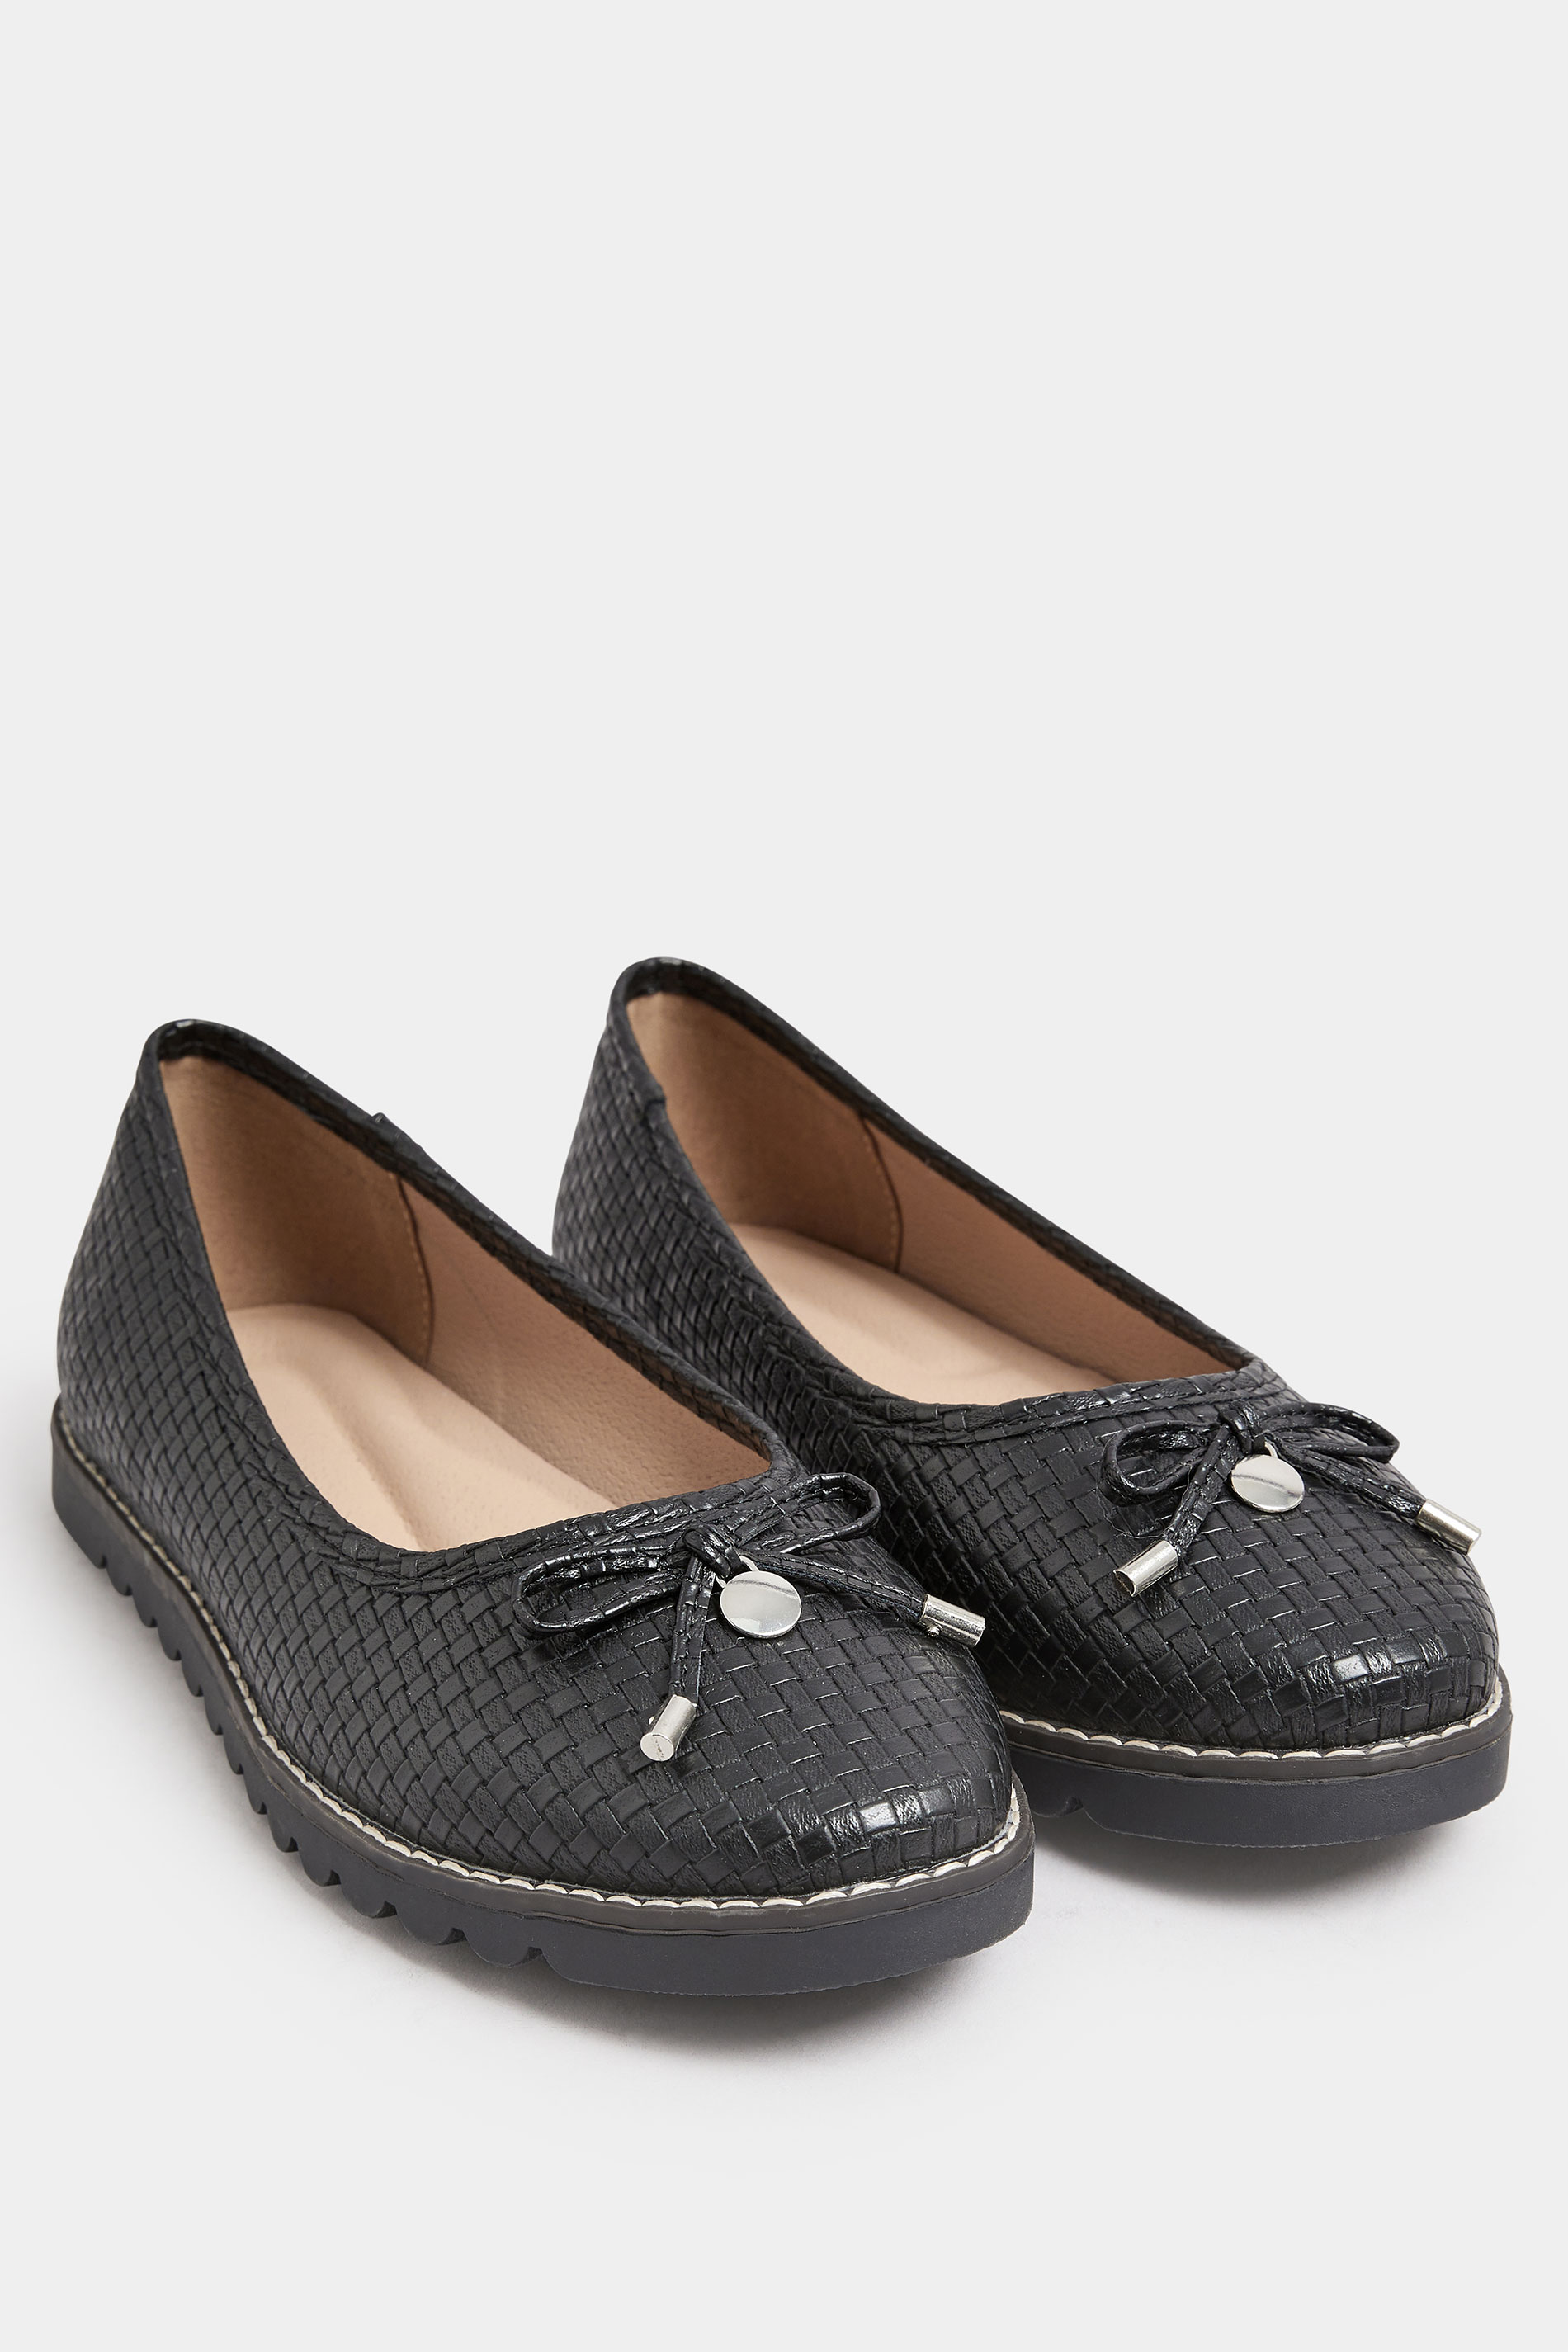 Black Woven Ballet Pumps In Extra Wide EEE Fit | Yours Clothing 2